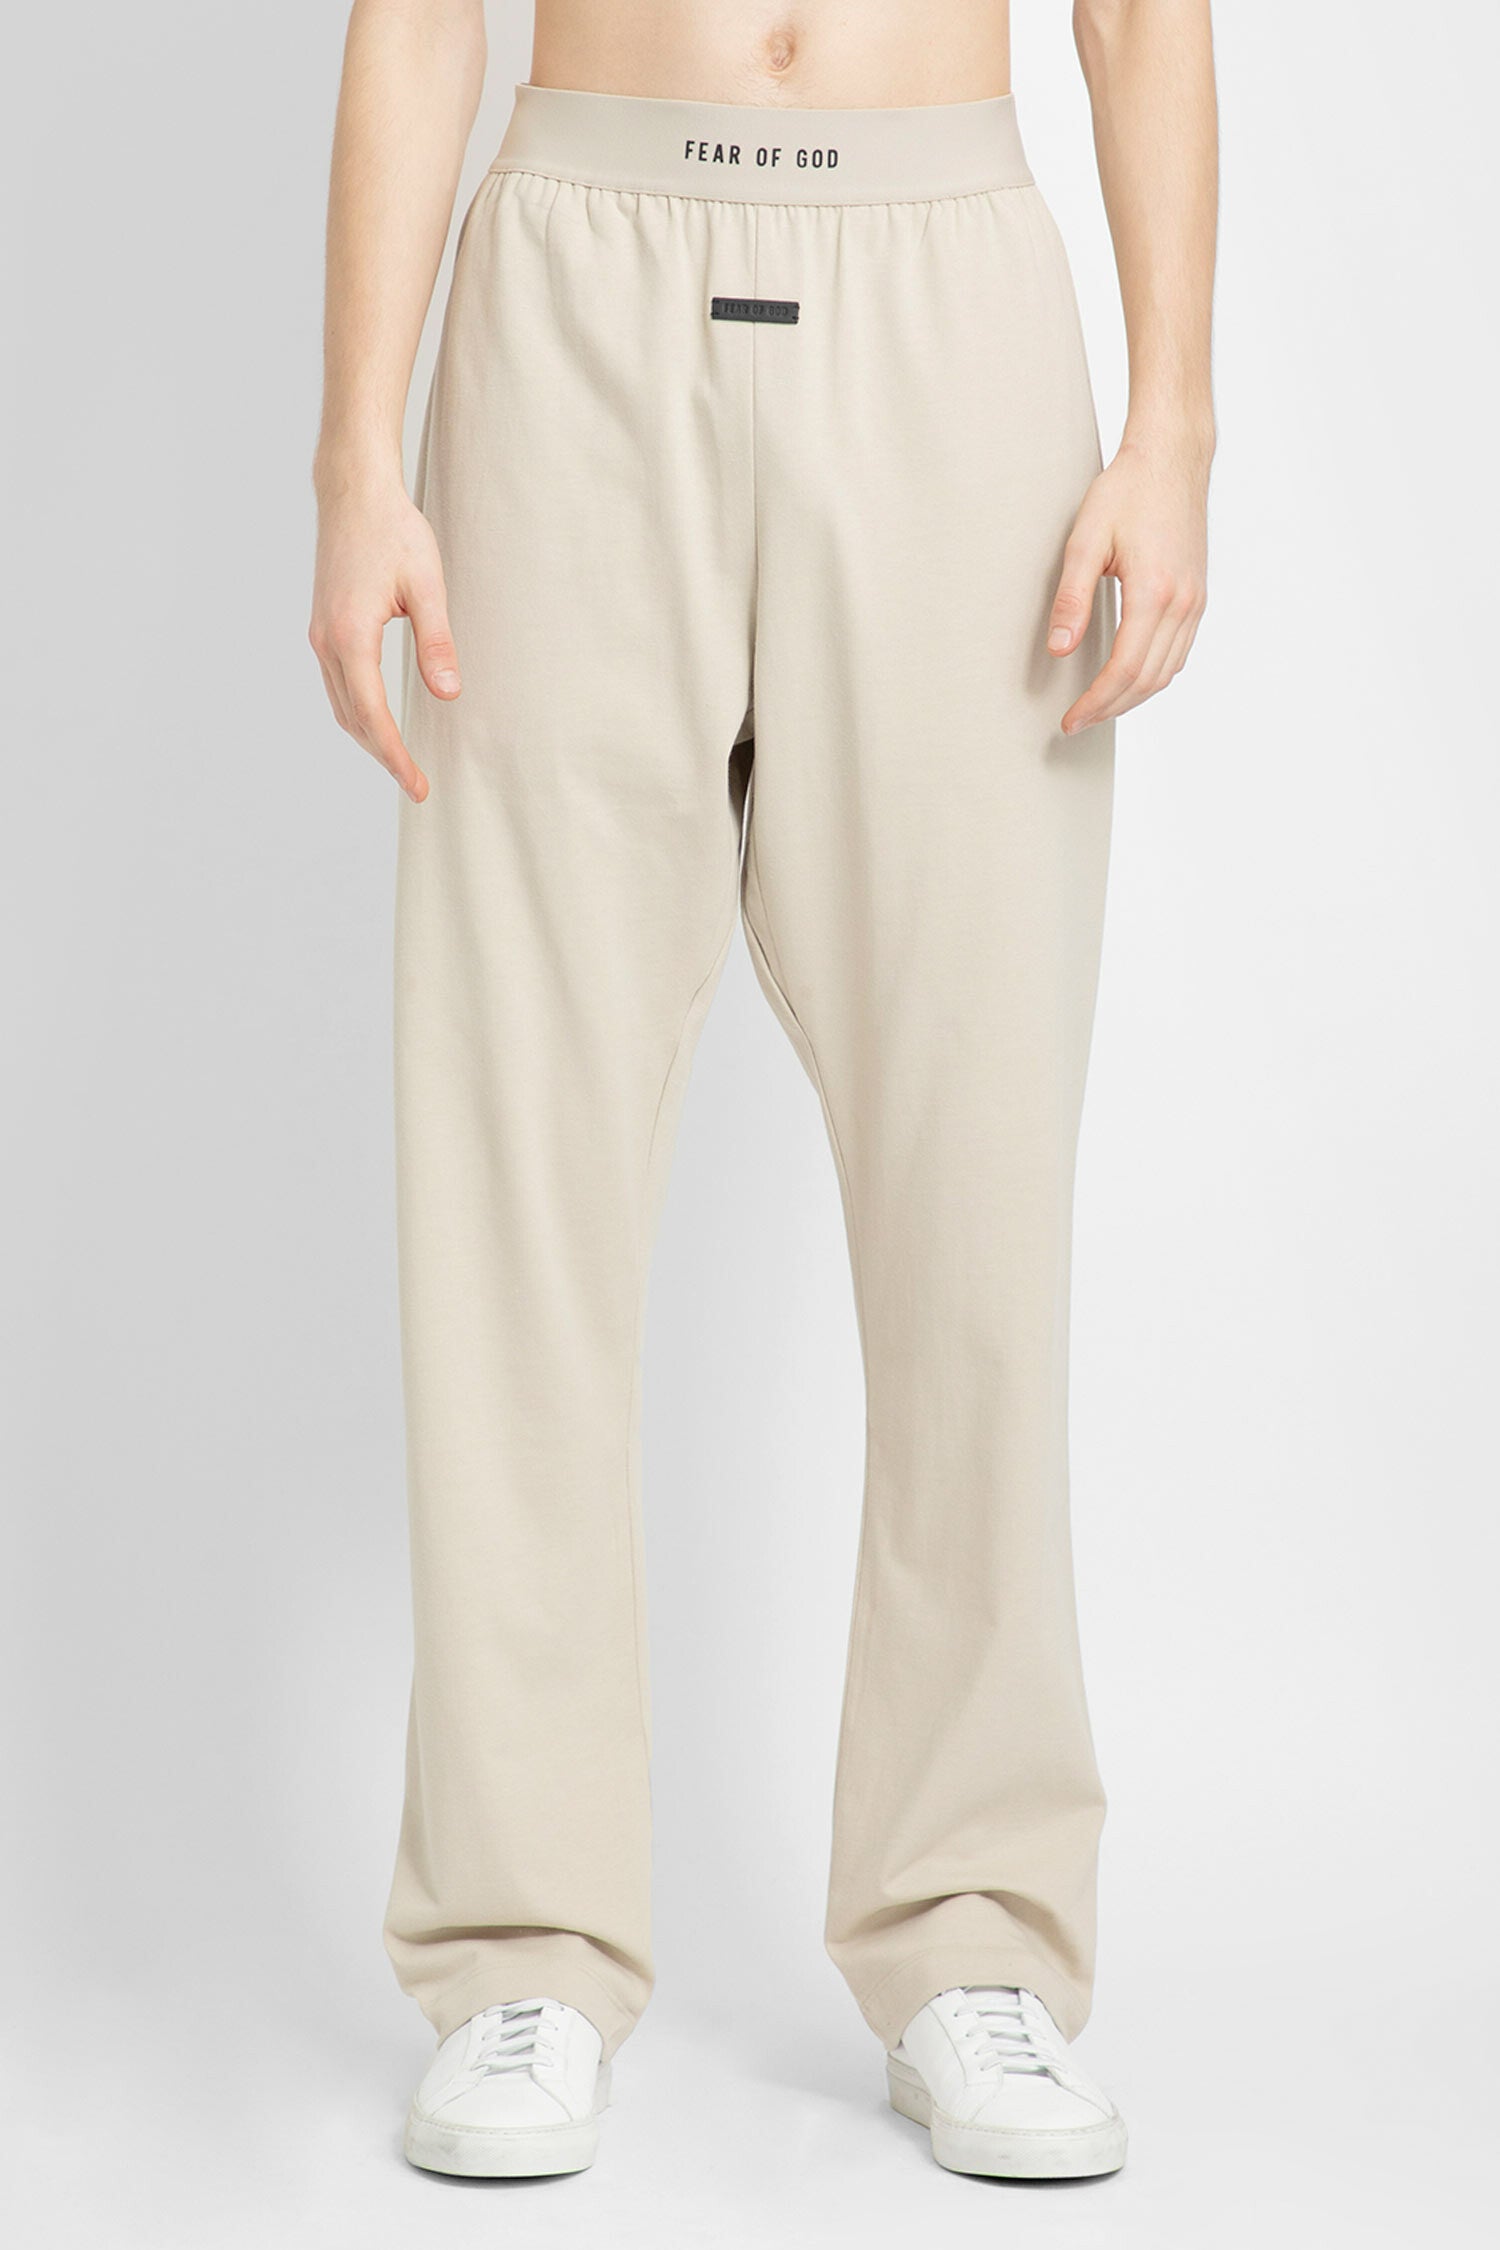 Fear of God Essentials Relaxed Trouser in Silver Cloud – Oneness Boutique